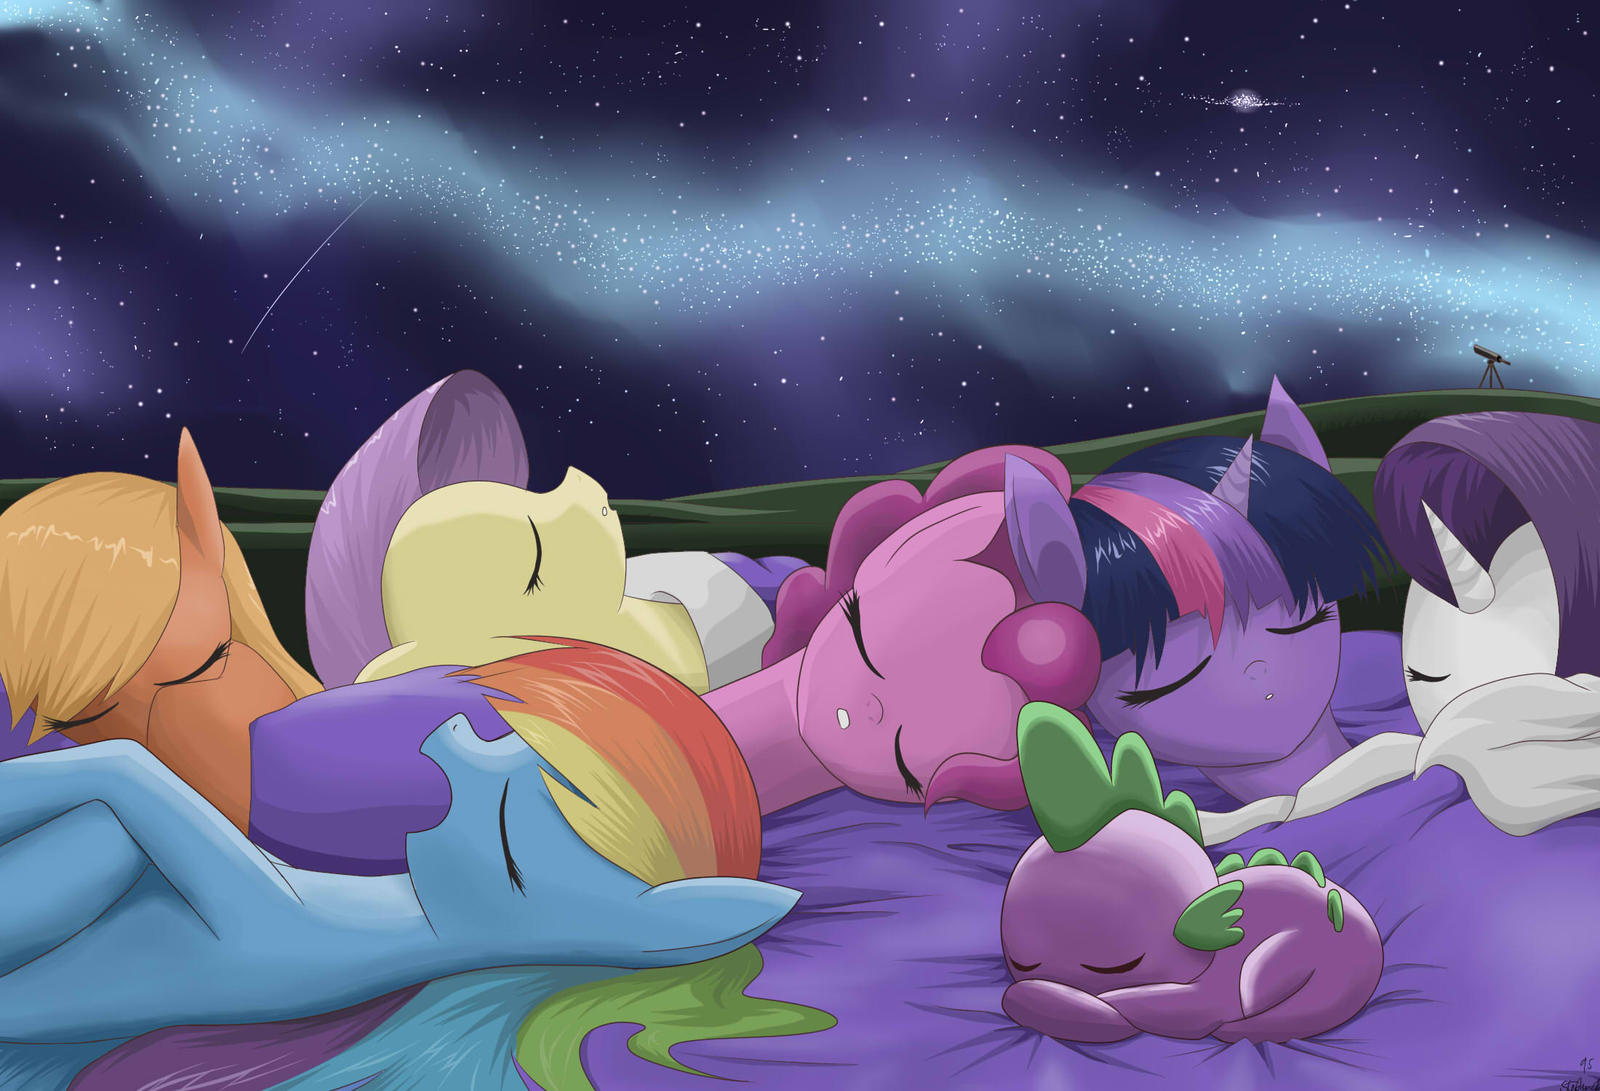 Nap with the stars